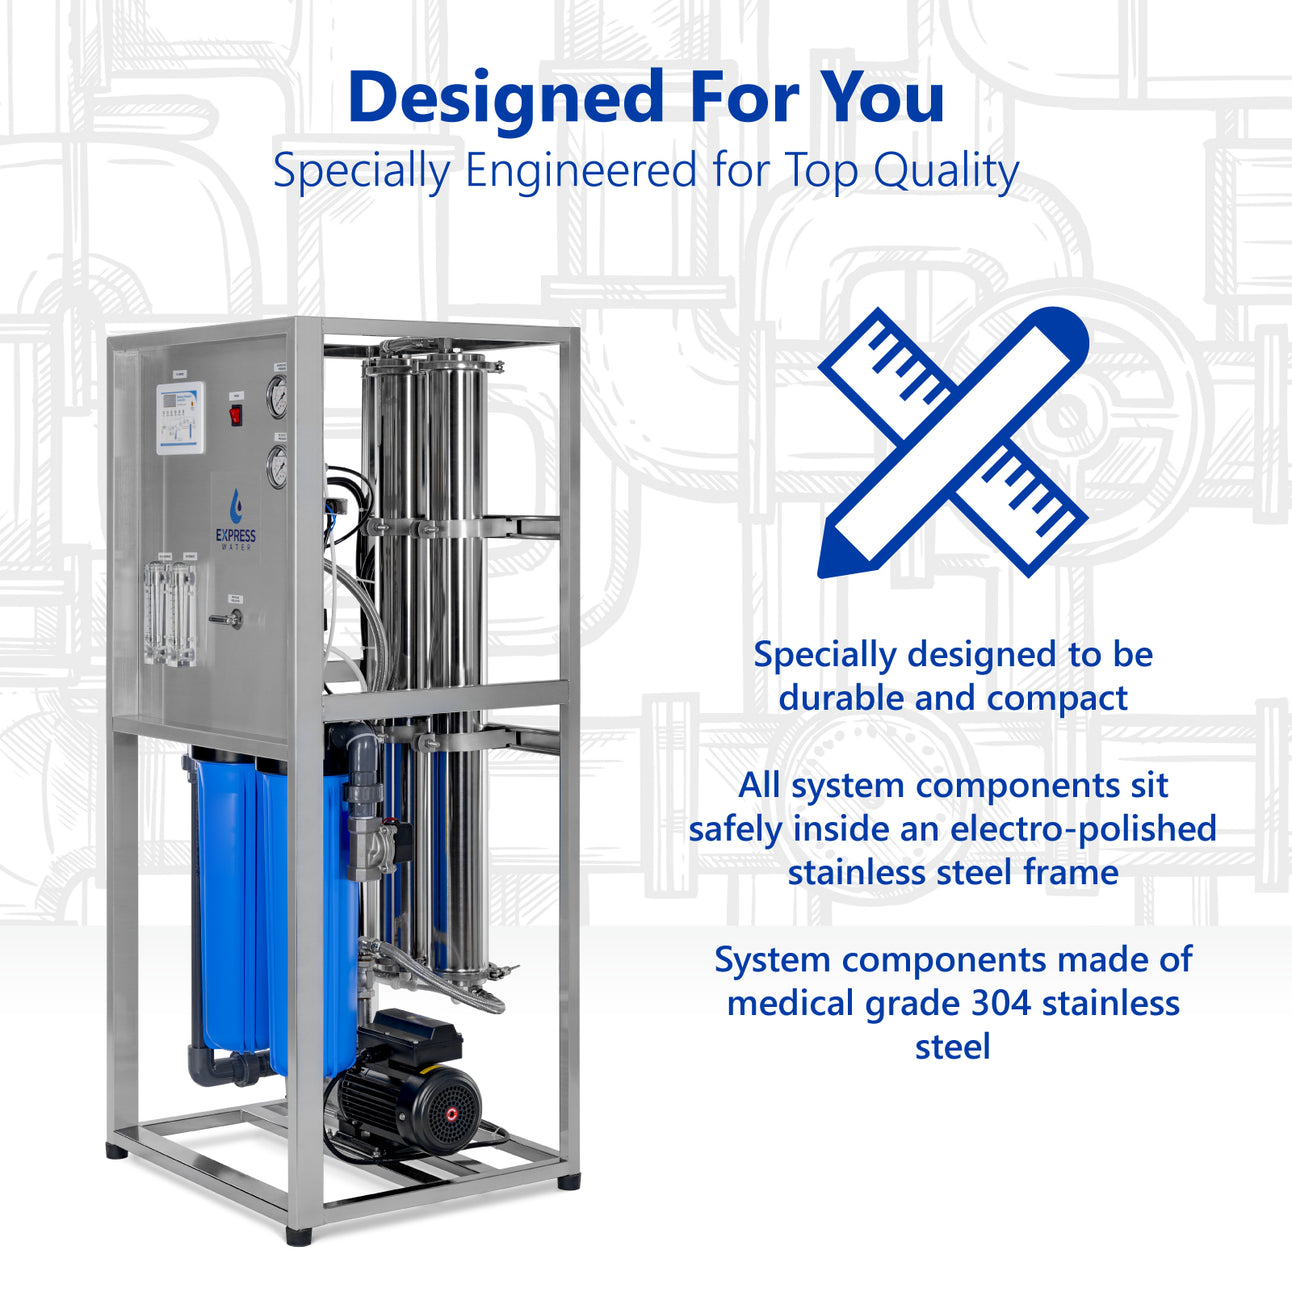 4000 GPD Commercial Reverse Osmosis Water Filtration System – 4 Stage High Capacity RO Filtration – Includes Pump, Gauges, 2 Membranes - dev-express-water